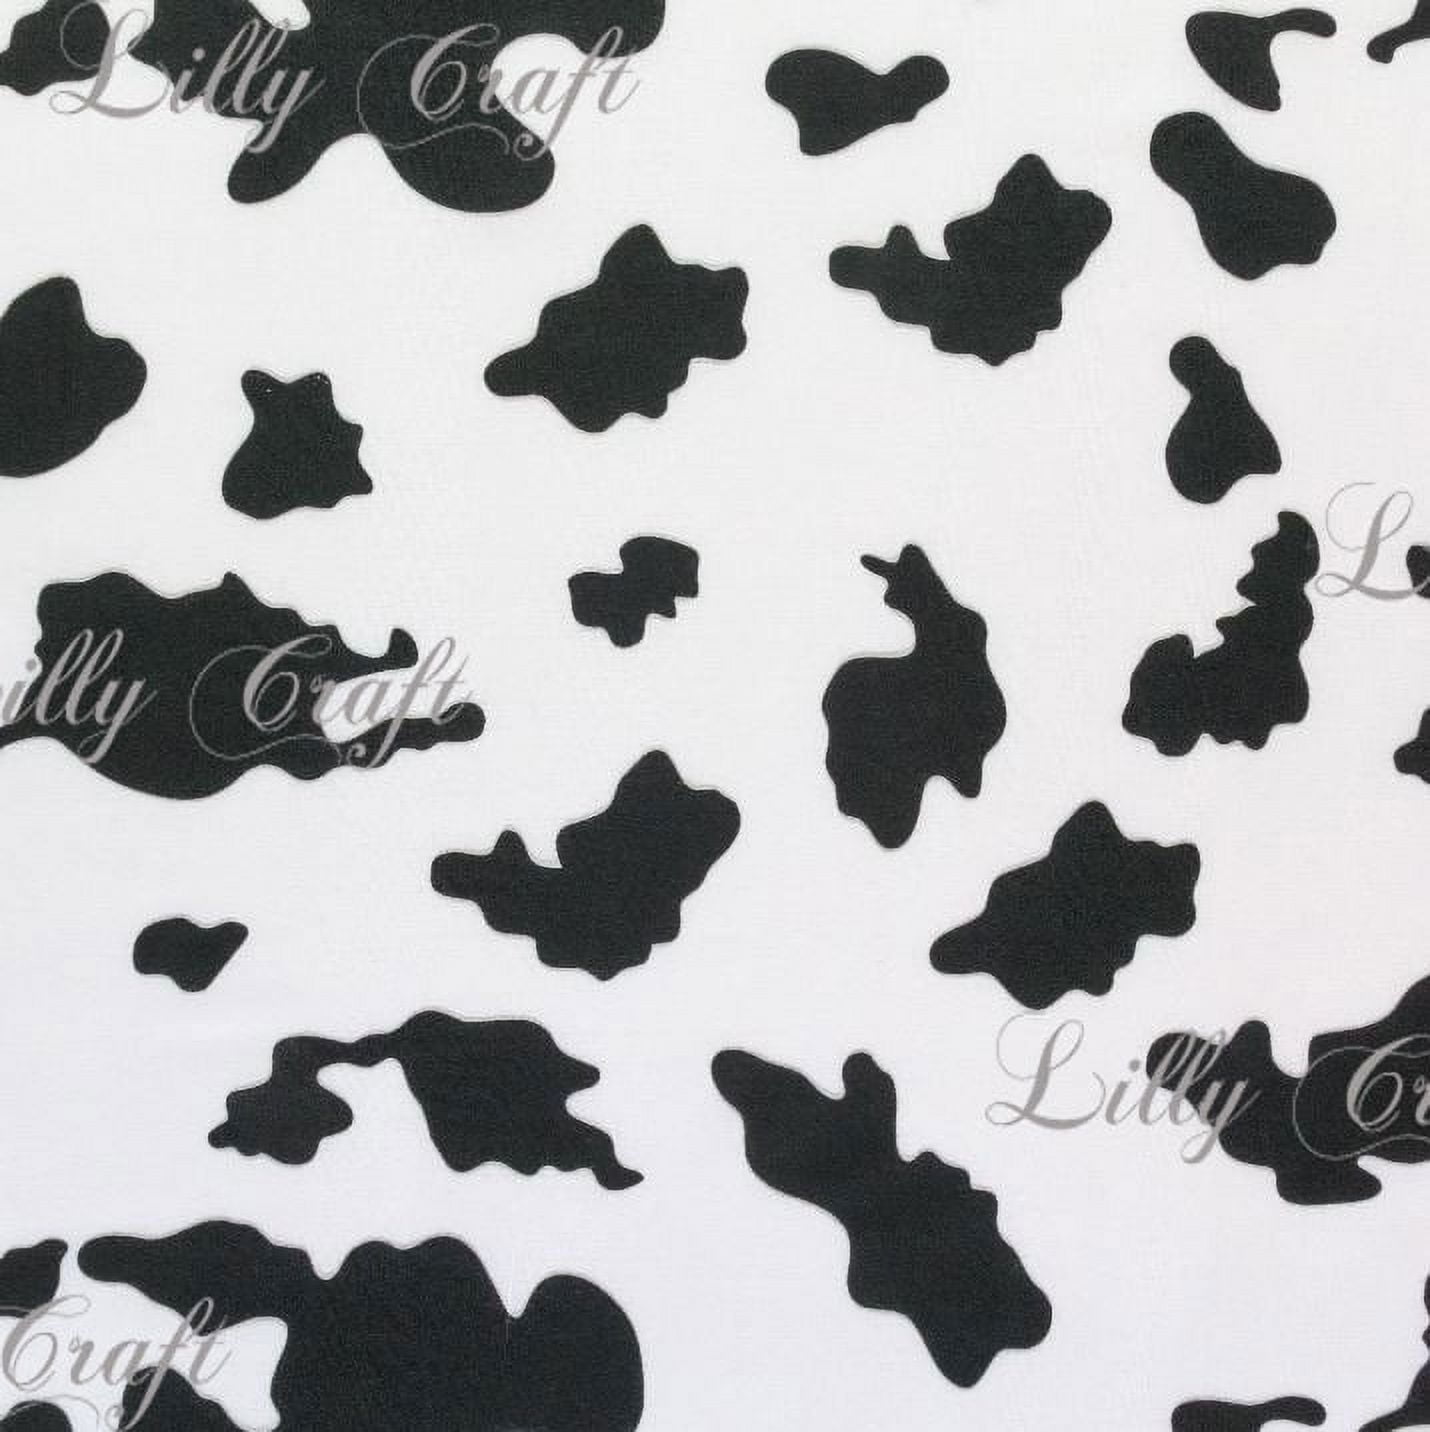 100% Cotton Black Fabric by the Yard for 6.99/Yard x 60 Wide | Black  Cotton Sheeting | Only 900 Yards Available | Mask Fabric, Shirt, Pouch